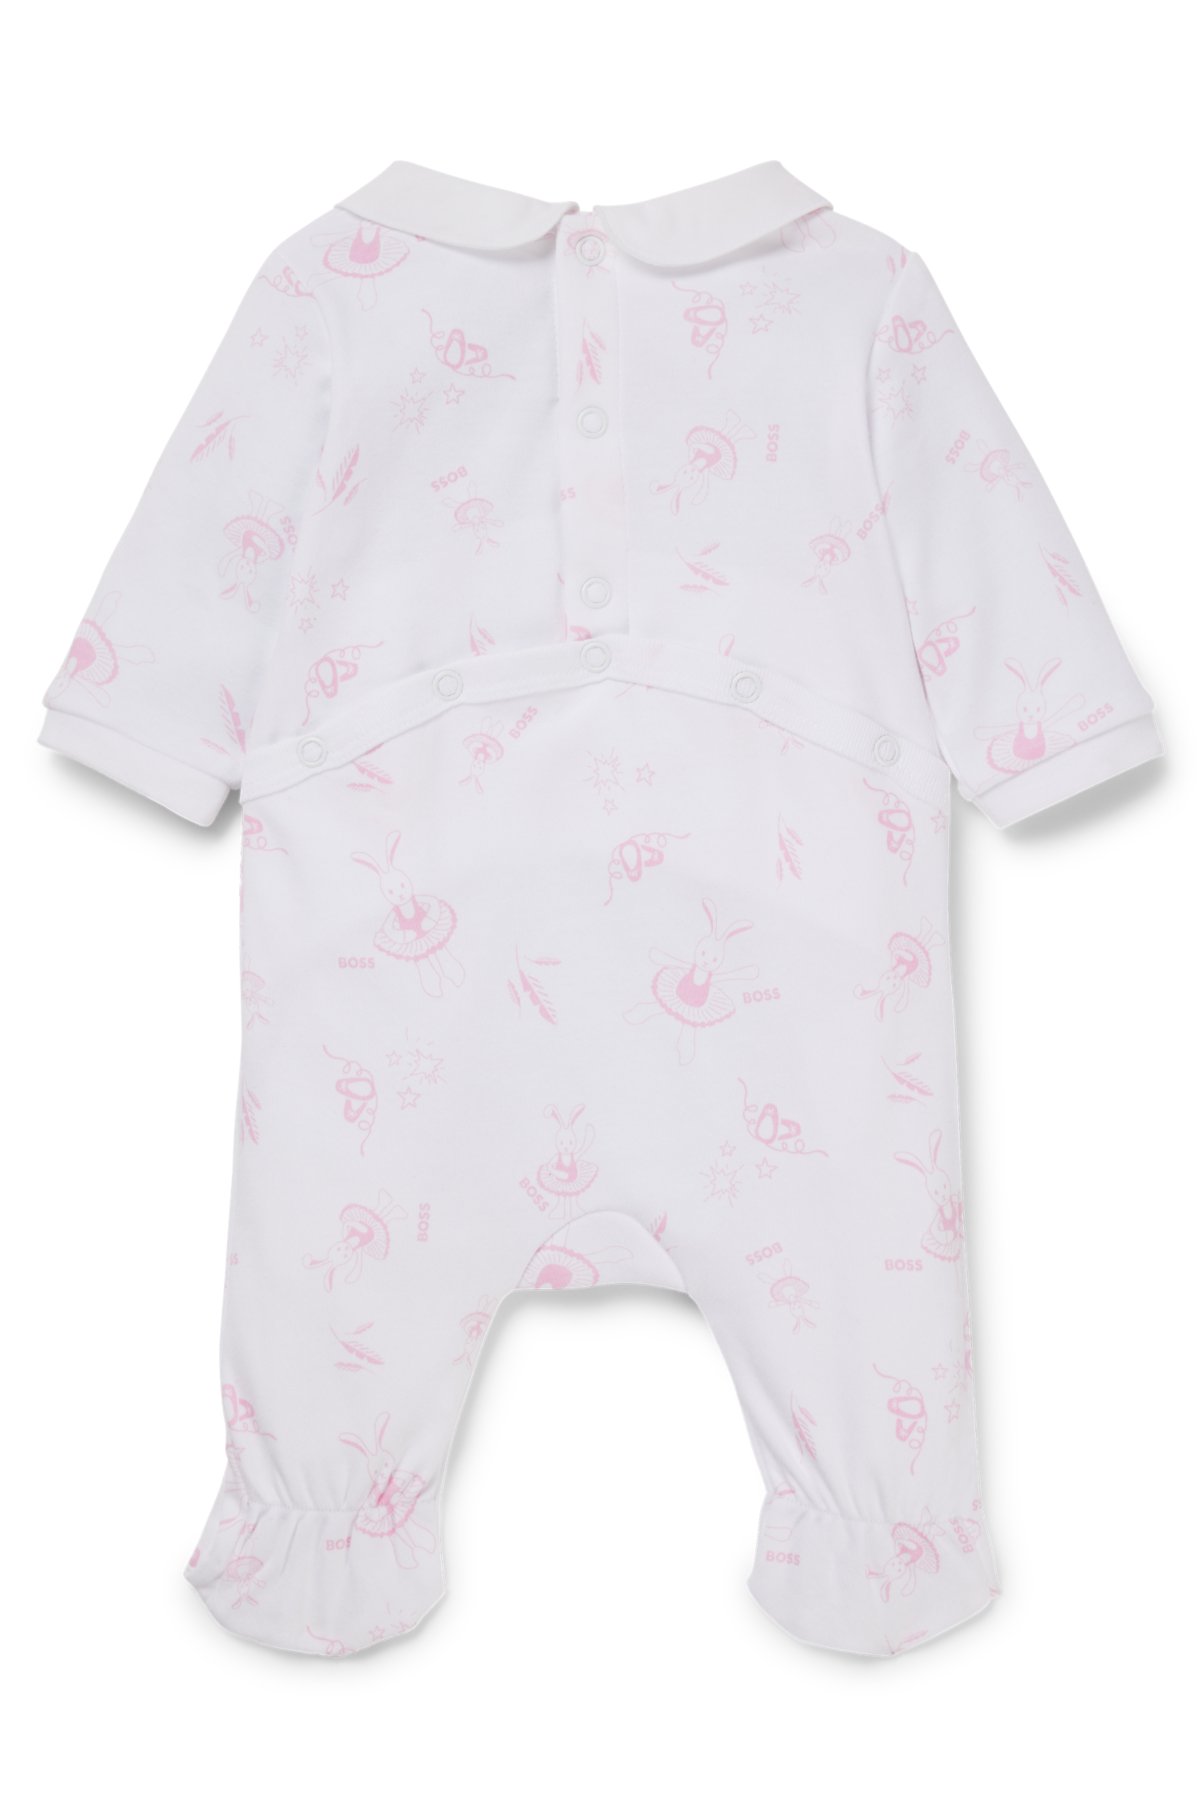 Baby sleepsuit with bunny motif and pan collar, White